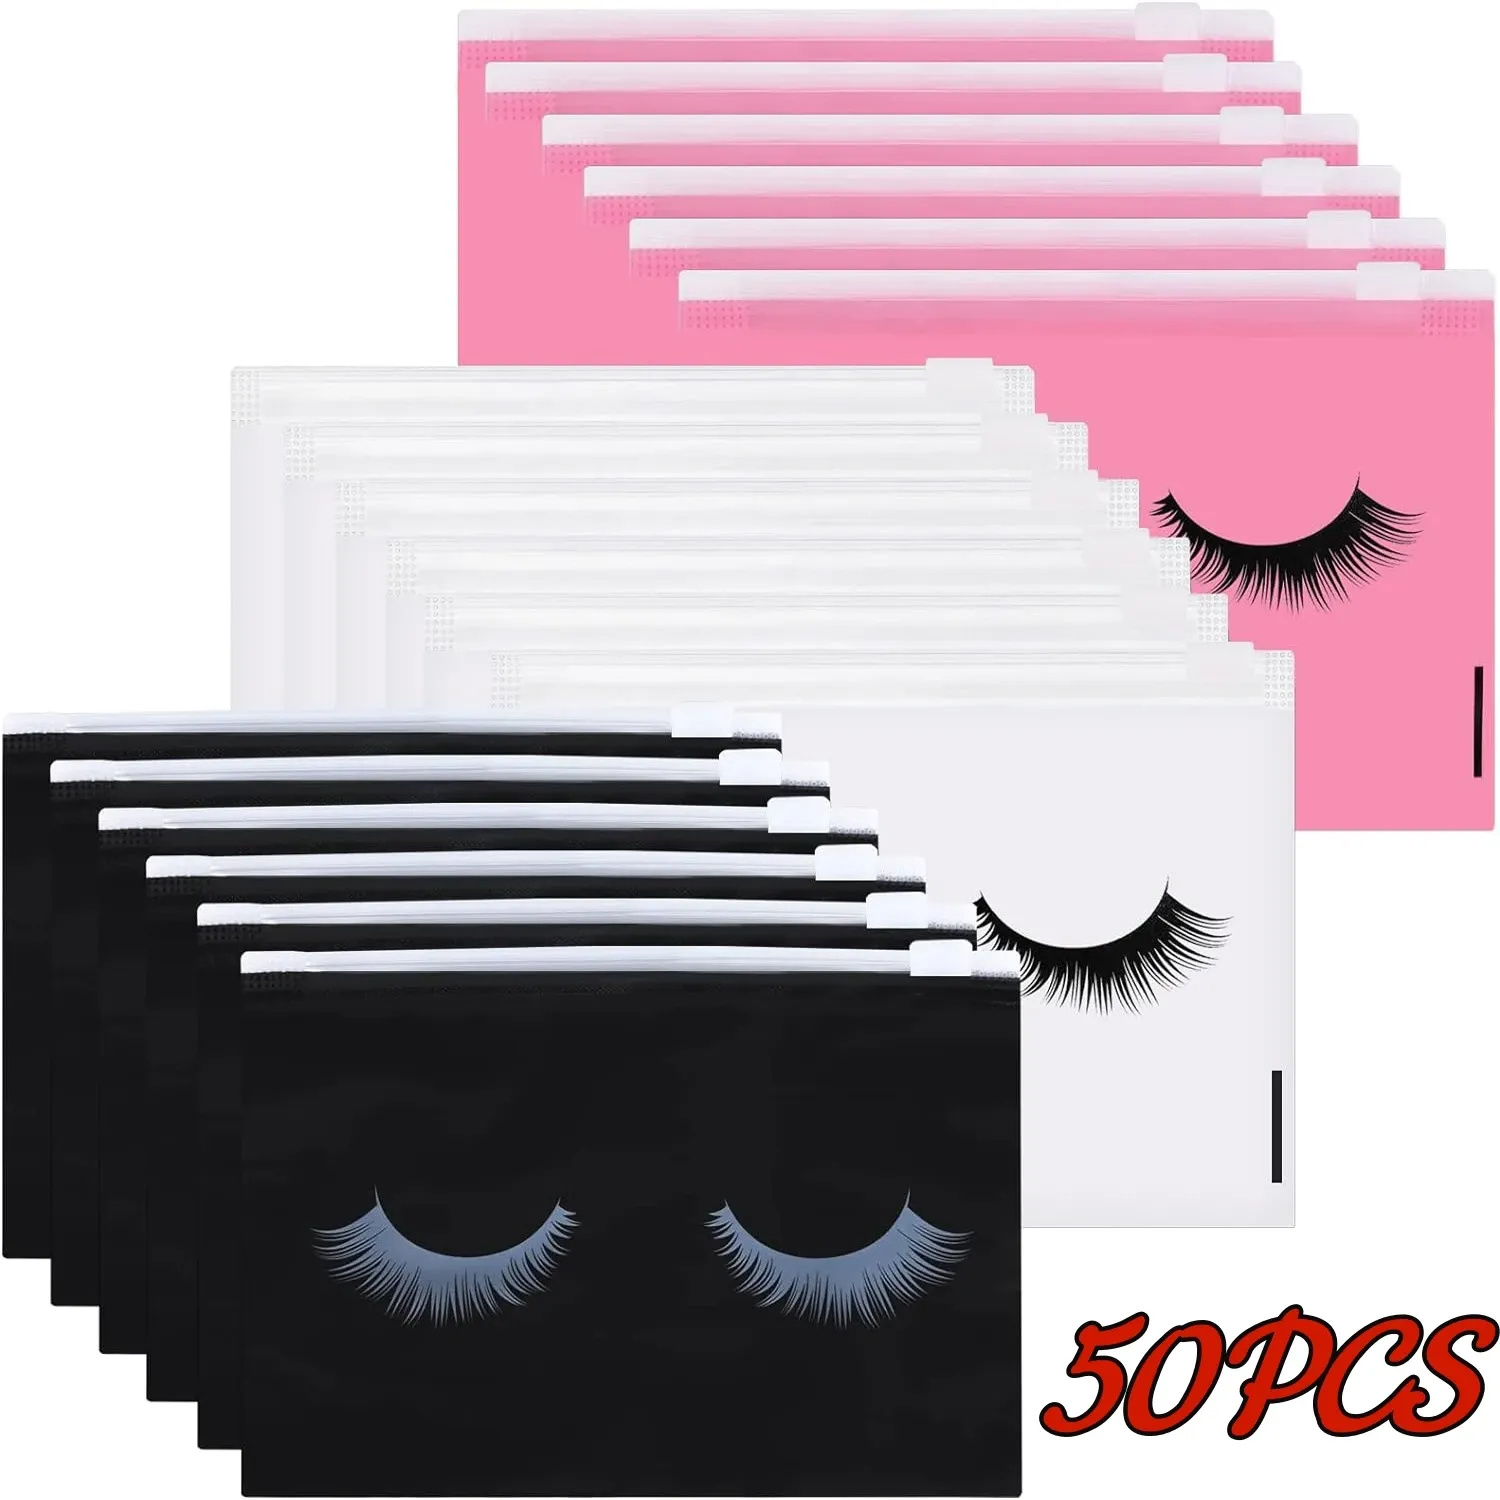 Bags 50pcs Plastic Eyelash Aftercare Bags Makeup Bags Toiletry Makeup Pouch Cosmetic Travel with Zipper Eyelash Supplies Wholesale